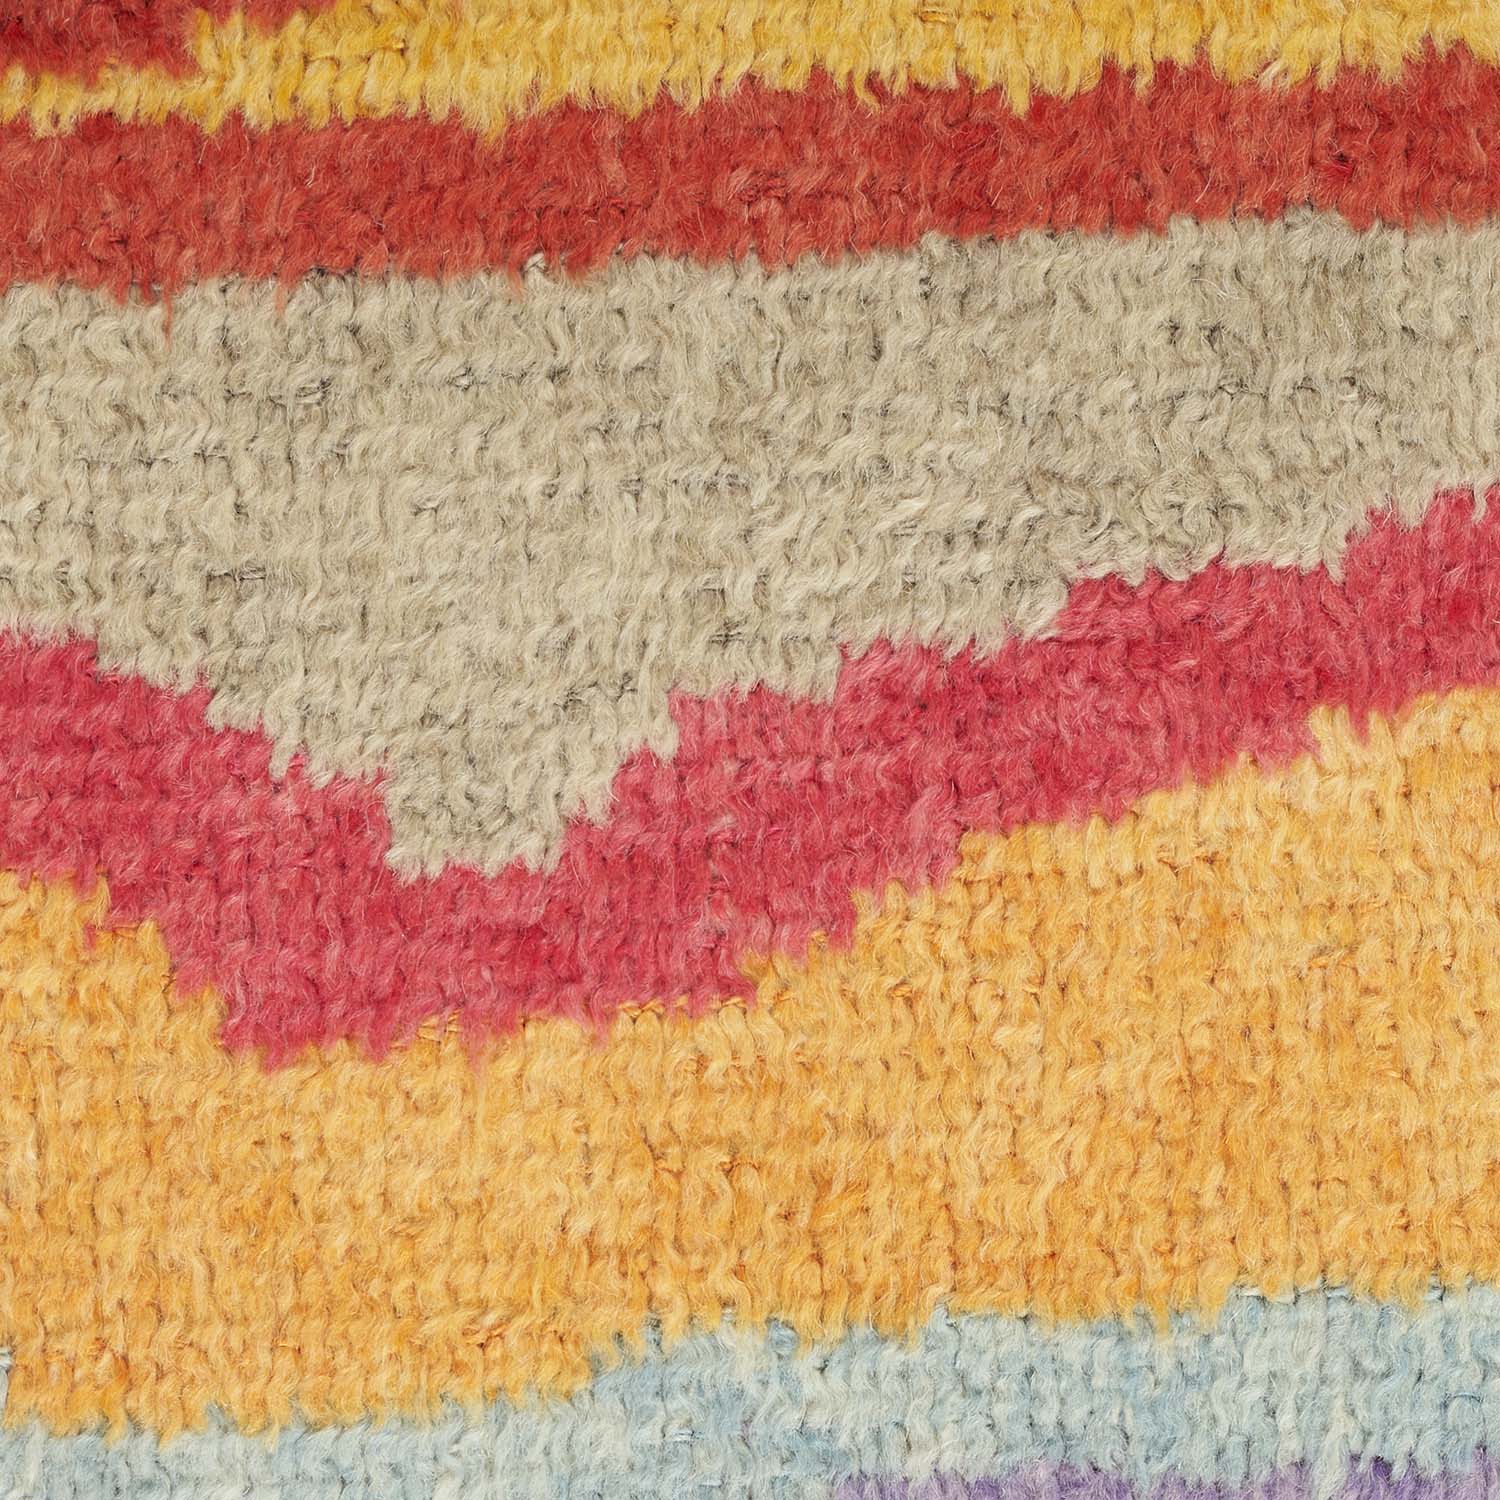 Close-up of multicolored striped rug with fluffy texture and weave pattern.